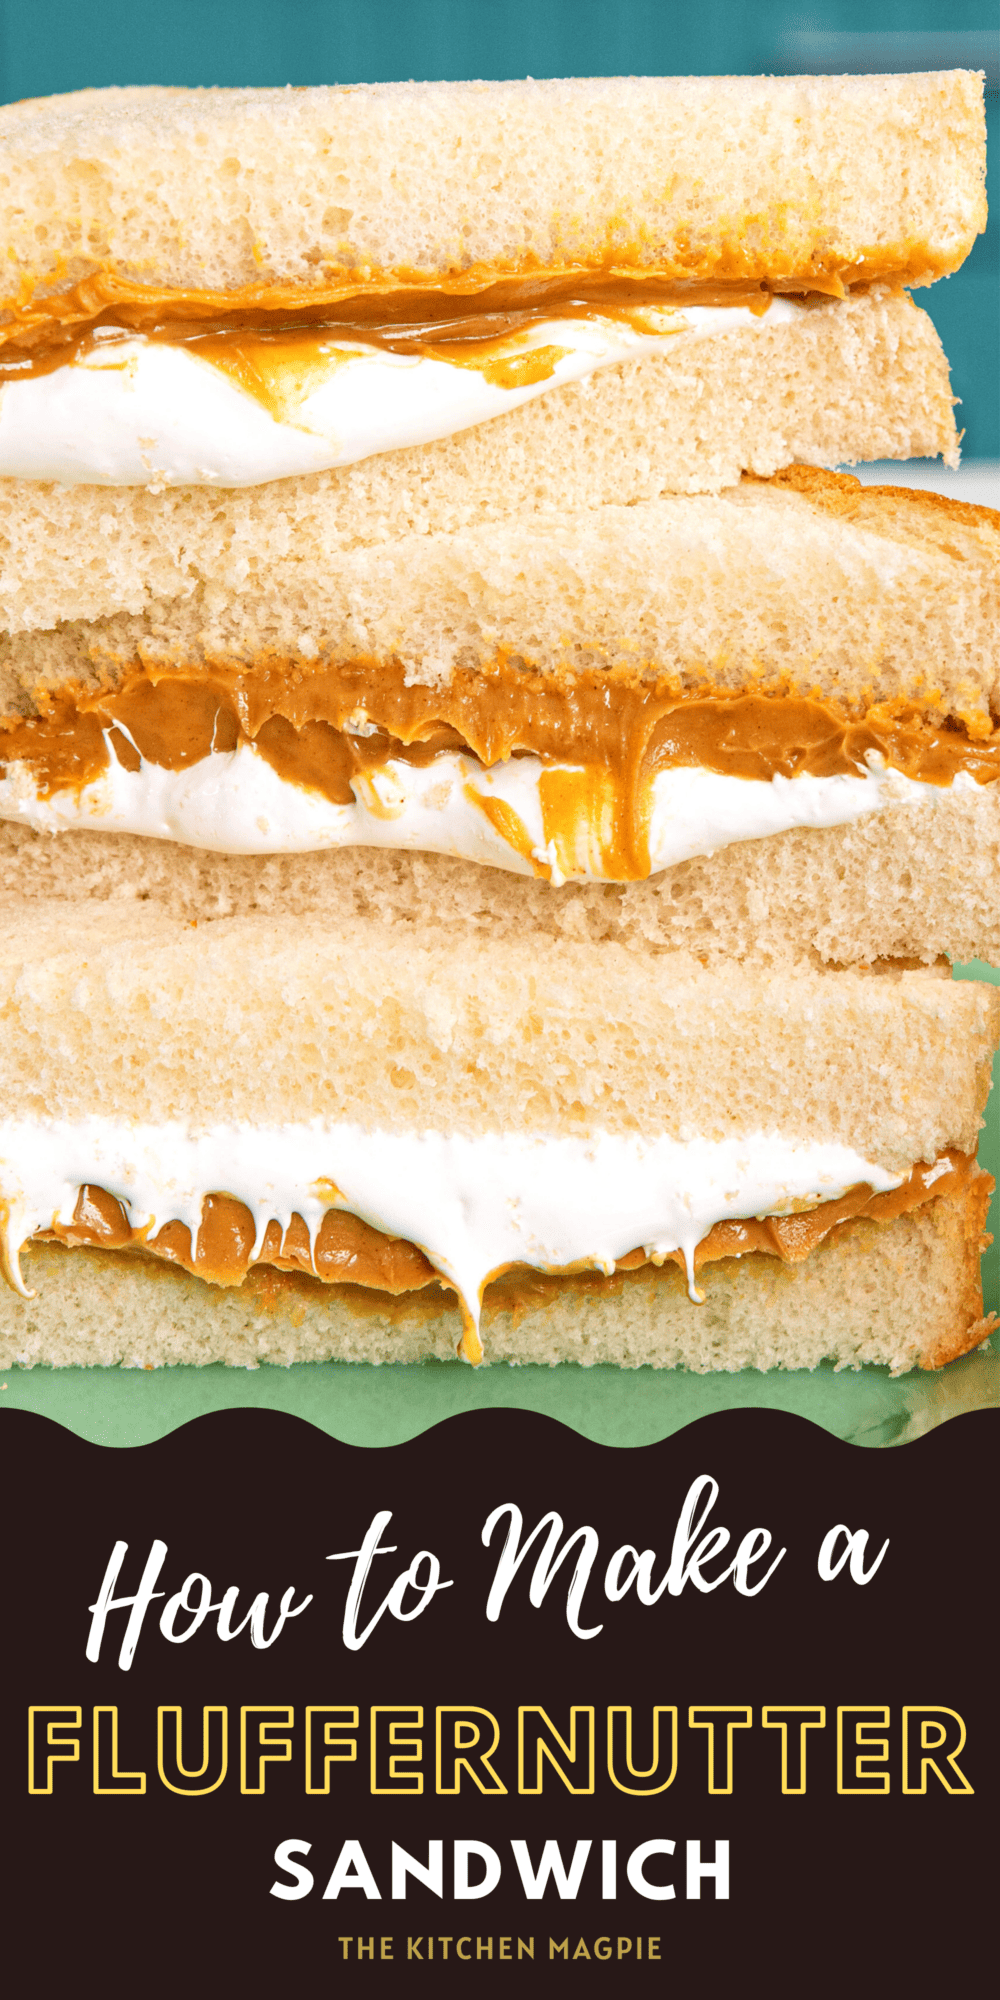 Nutty, salty peanut butter is paired with marshmallow cream between thick slices of white bread for the sweetest dessert sandwich ever!